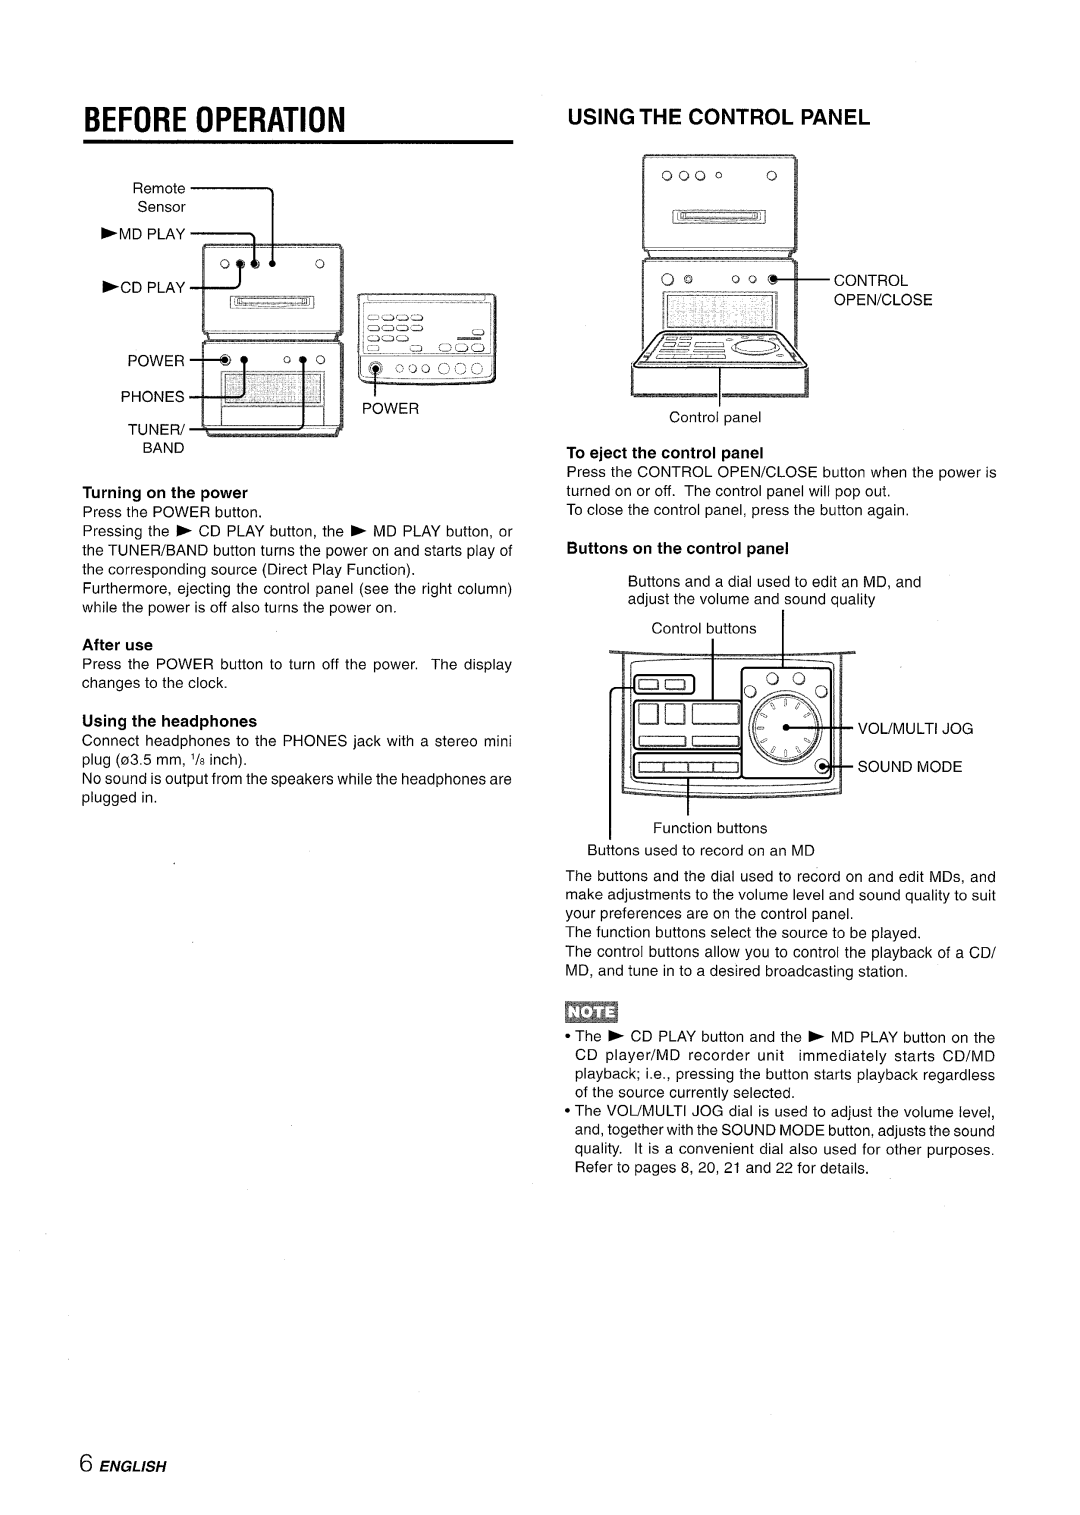 Aiwa XR-MD95 manual Before Operation, Using The Control Panel, English 